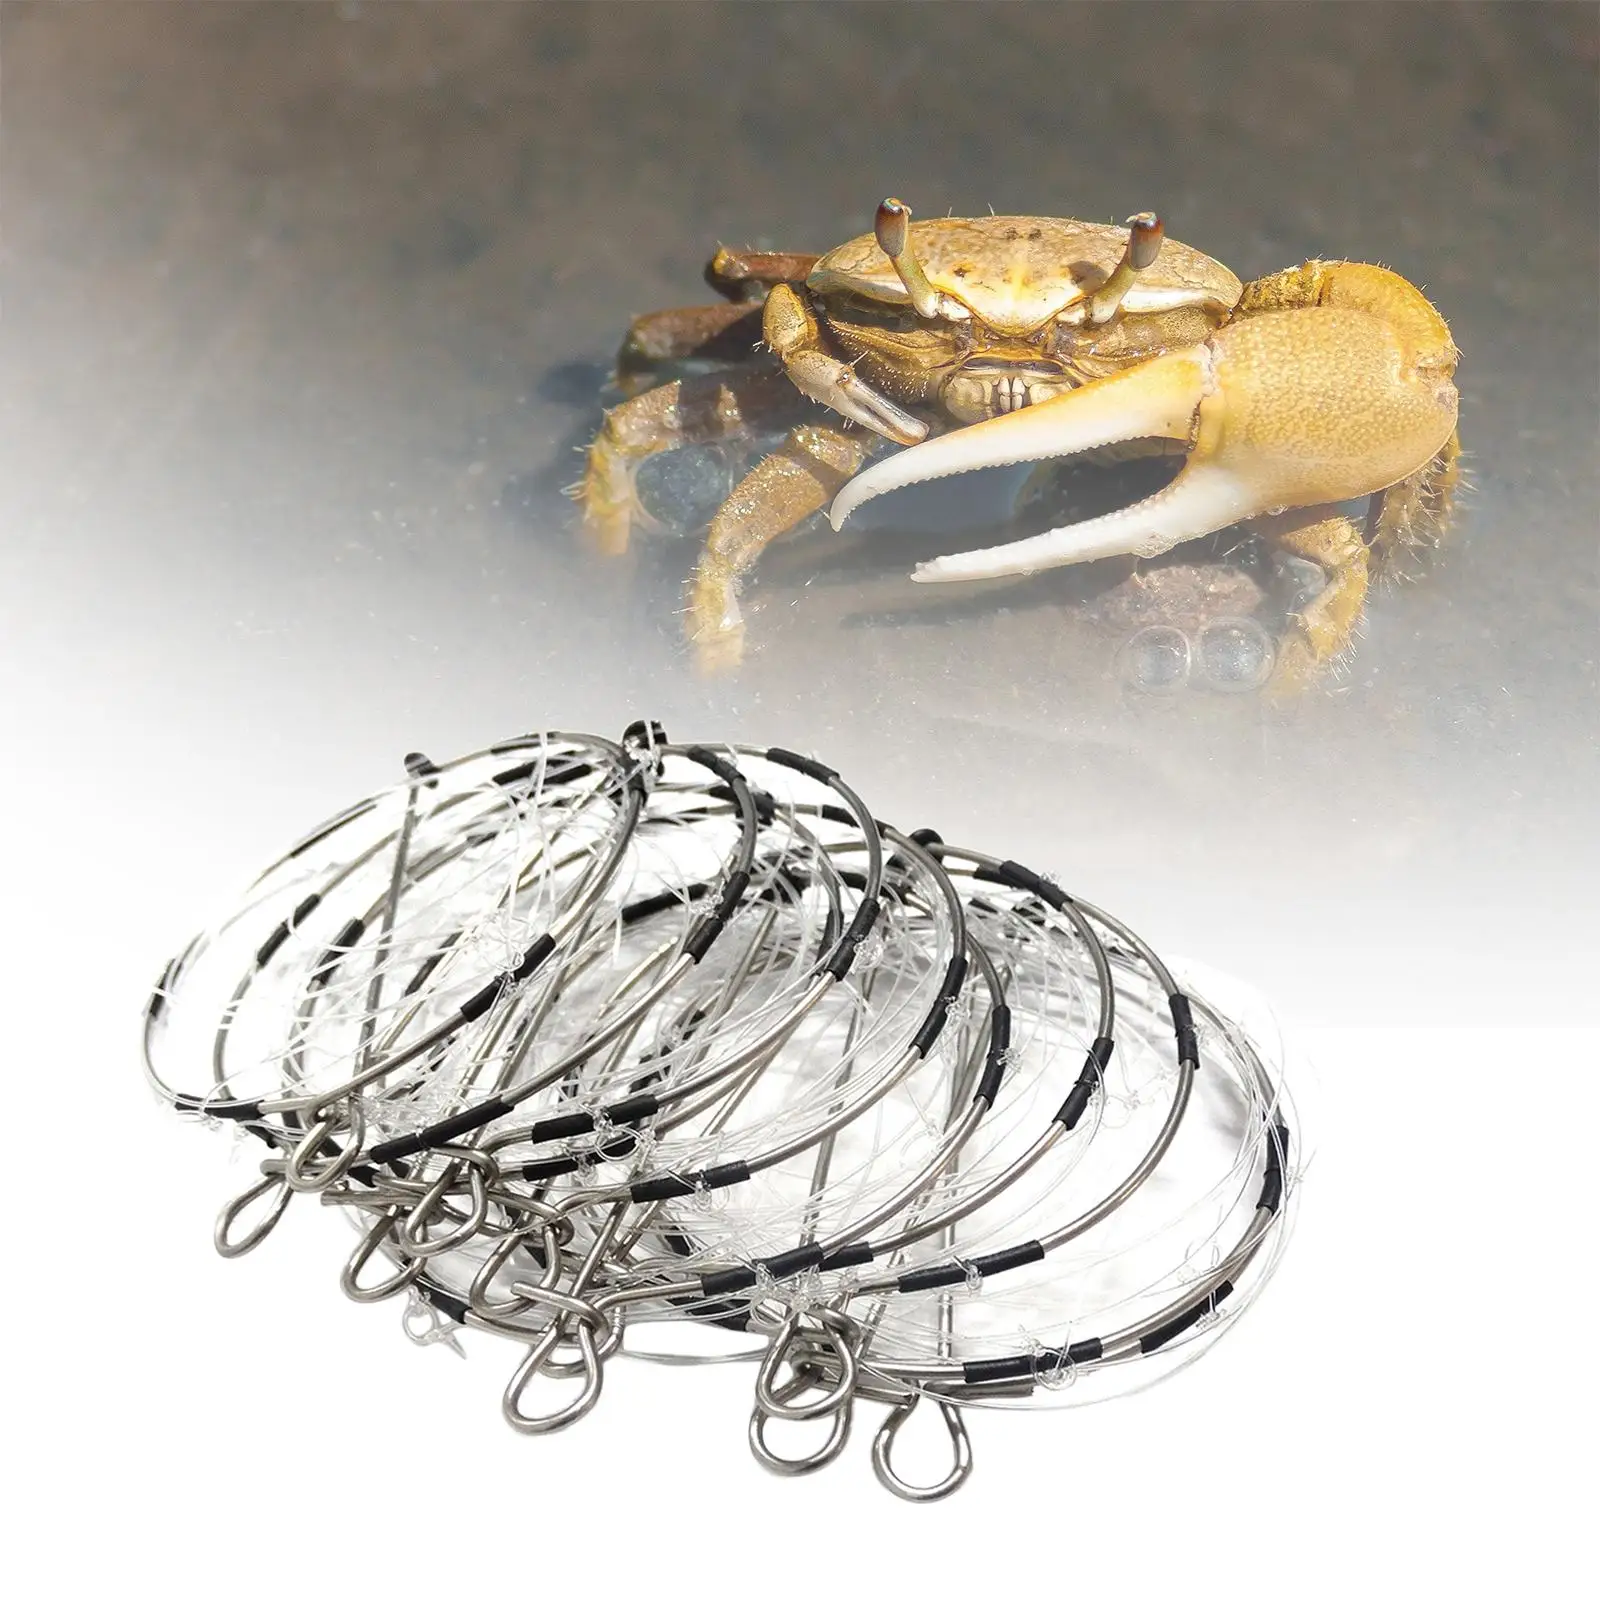 10 Pieces Crab Cast Trap 6-ring Cast Dip Cage Repeated Use Steel Catch Crabs Tool for Crawfish crab lobsters shrimp Seaside